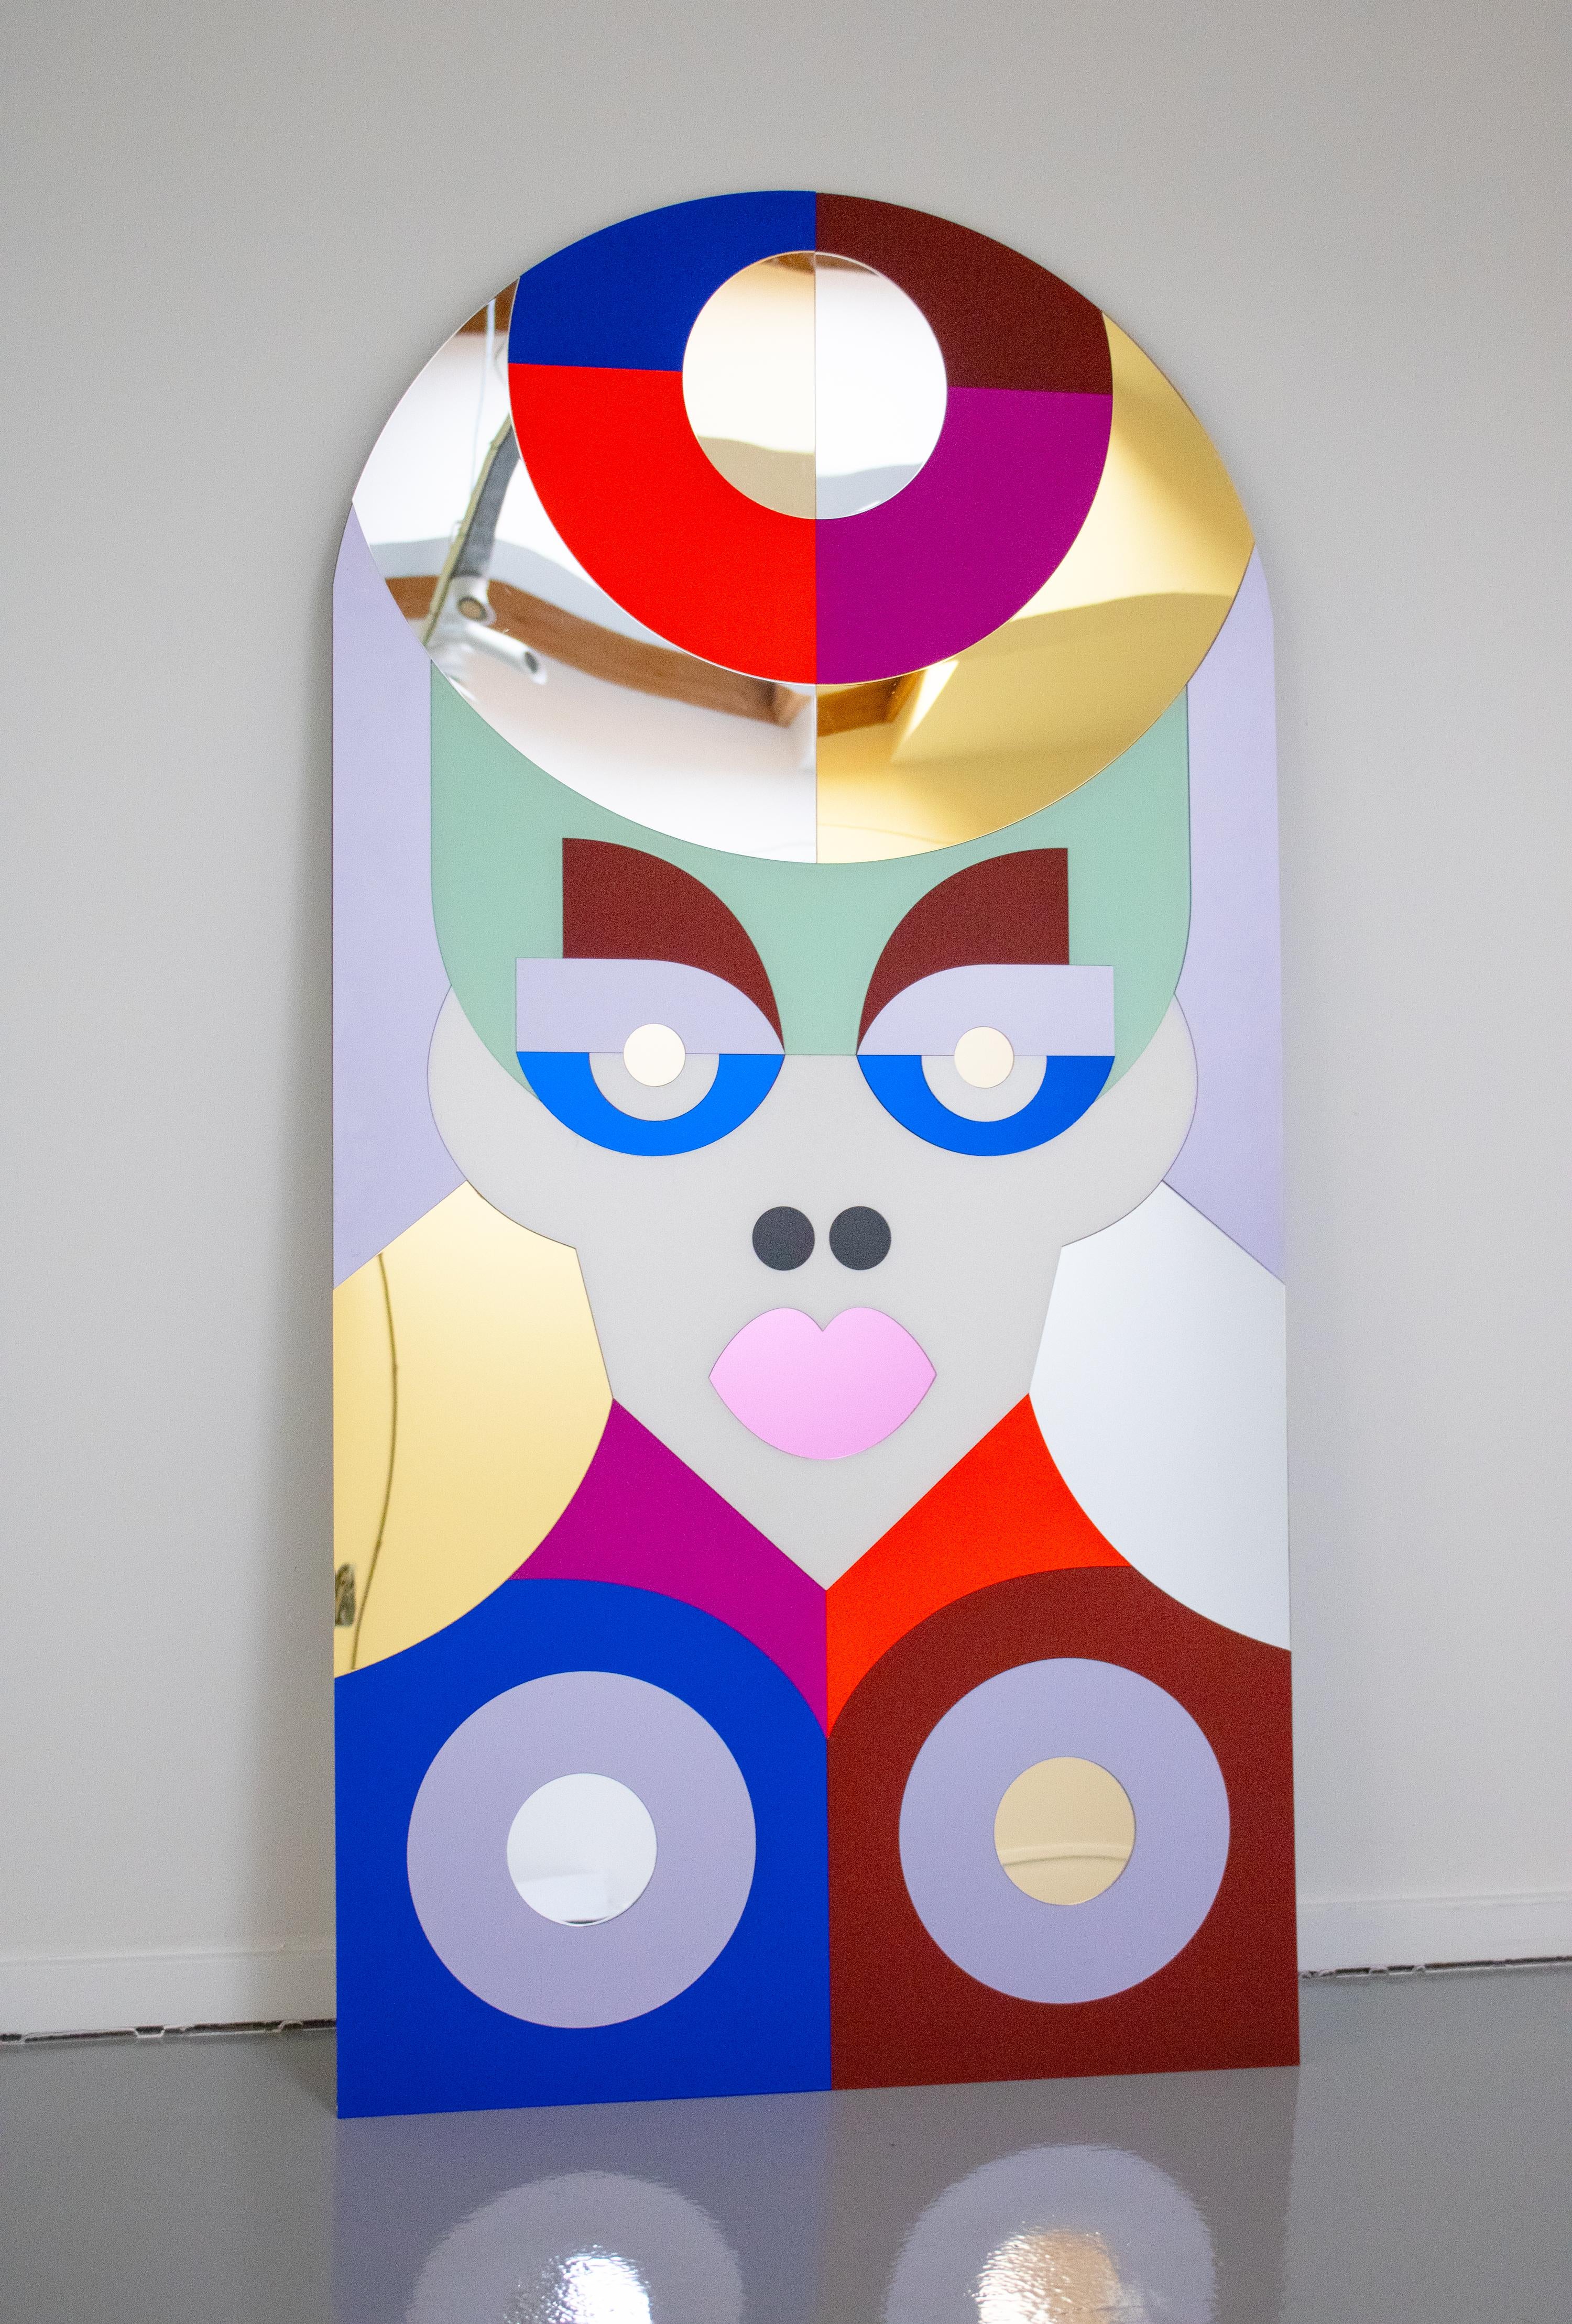 Karma, large colorful mirror artwork made of plexiglass For Sale 3